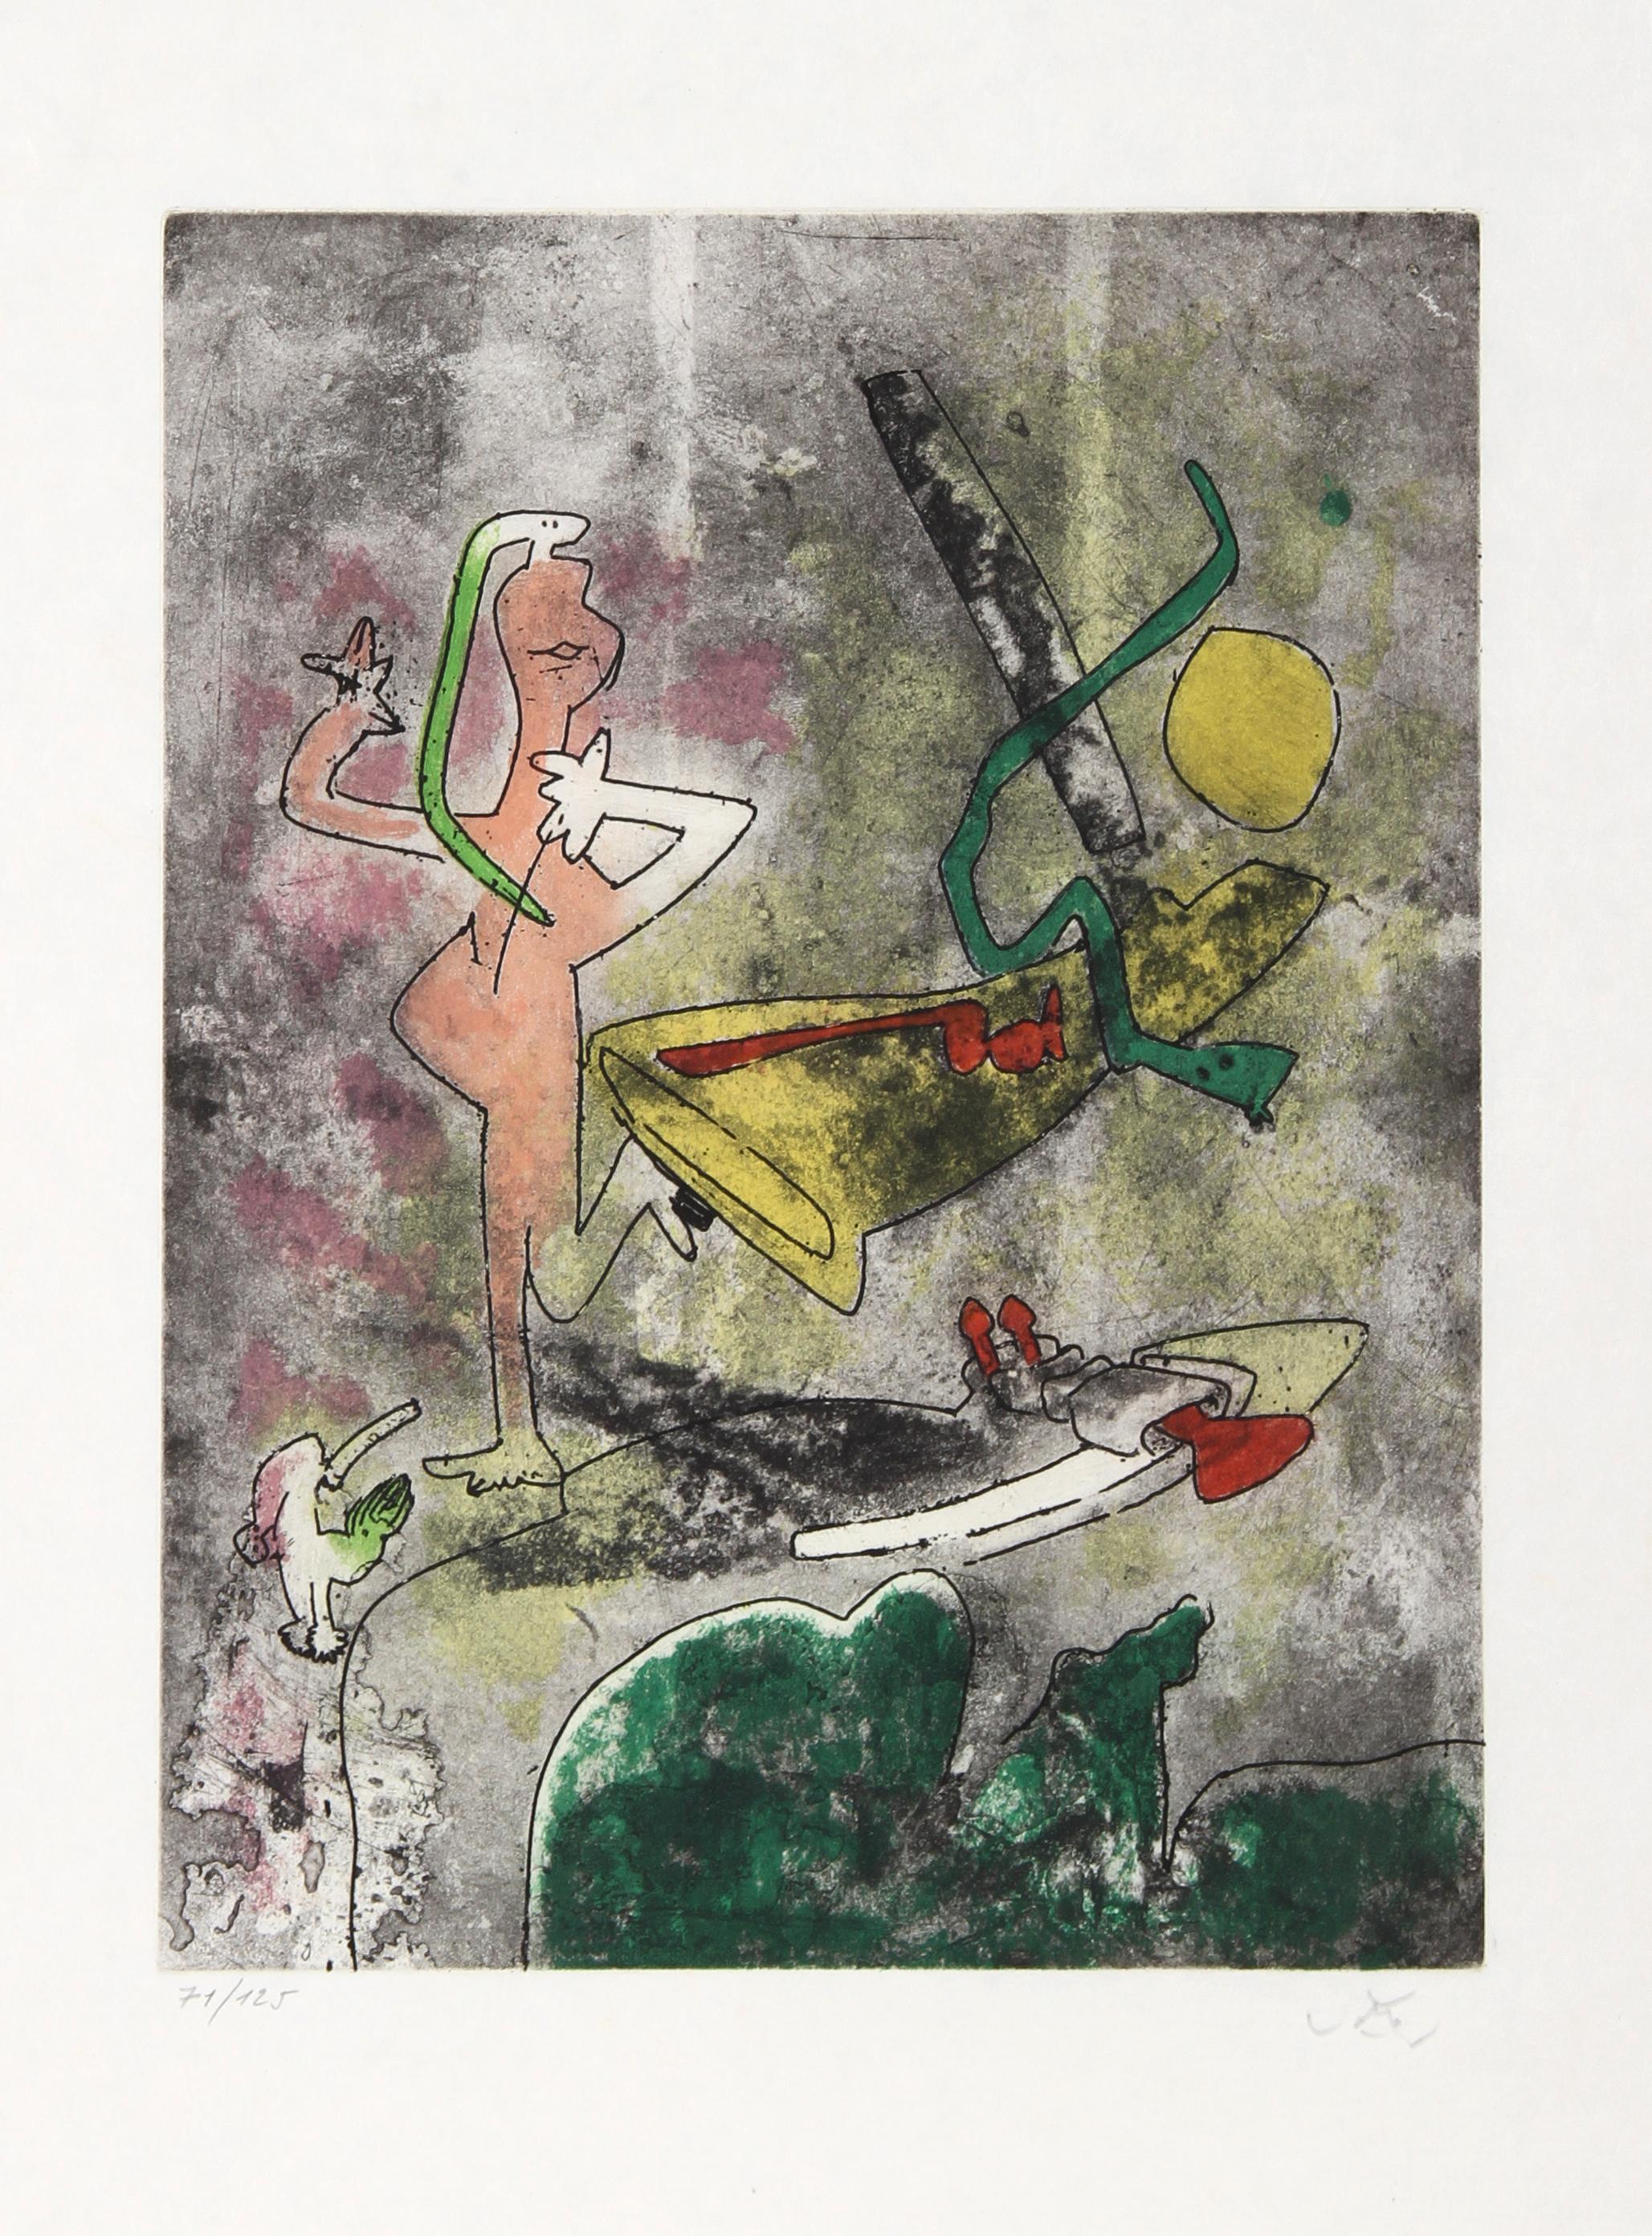 Centre Noeuds, Suite of 10 Aquatint Etchings by Matta - Surrealist Print by Roberto Matta